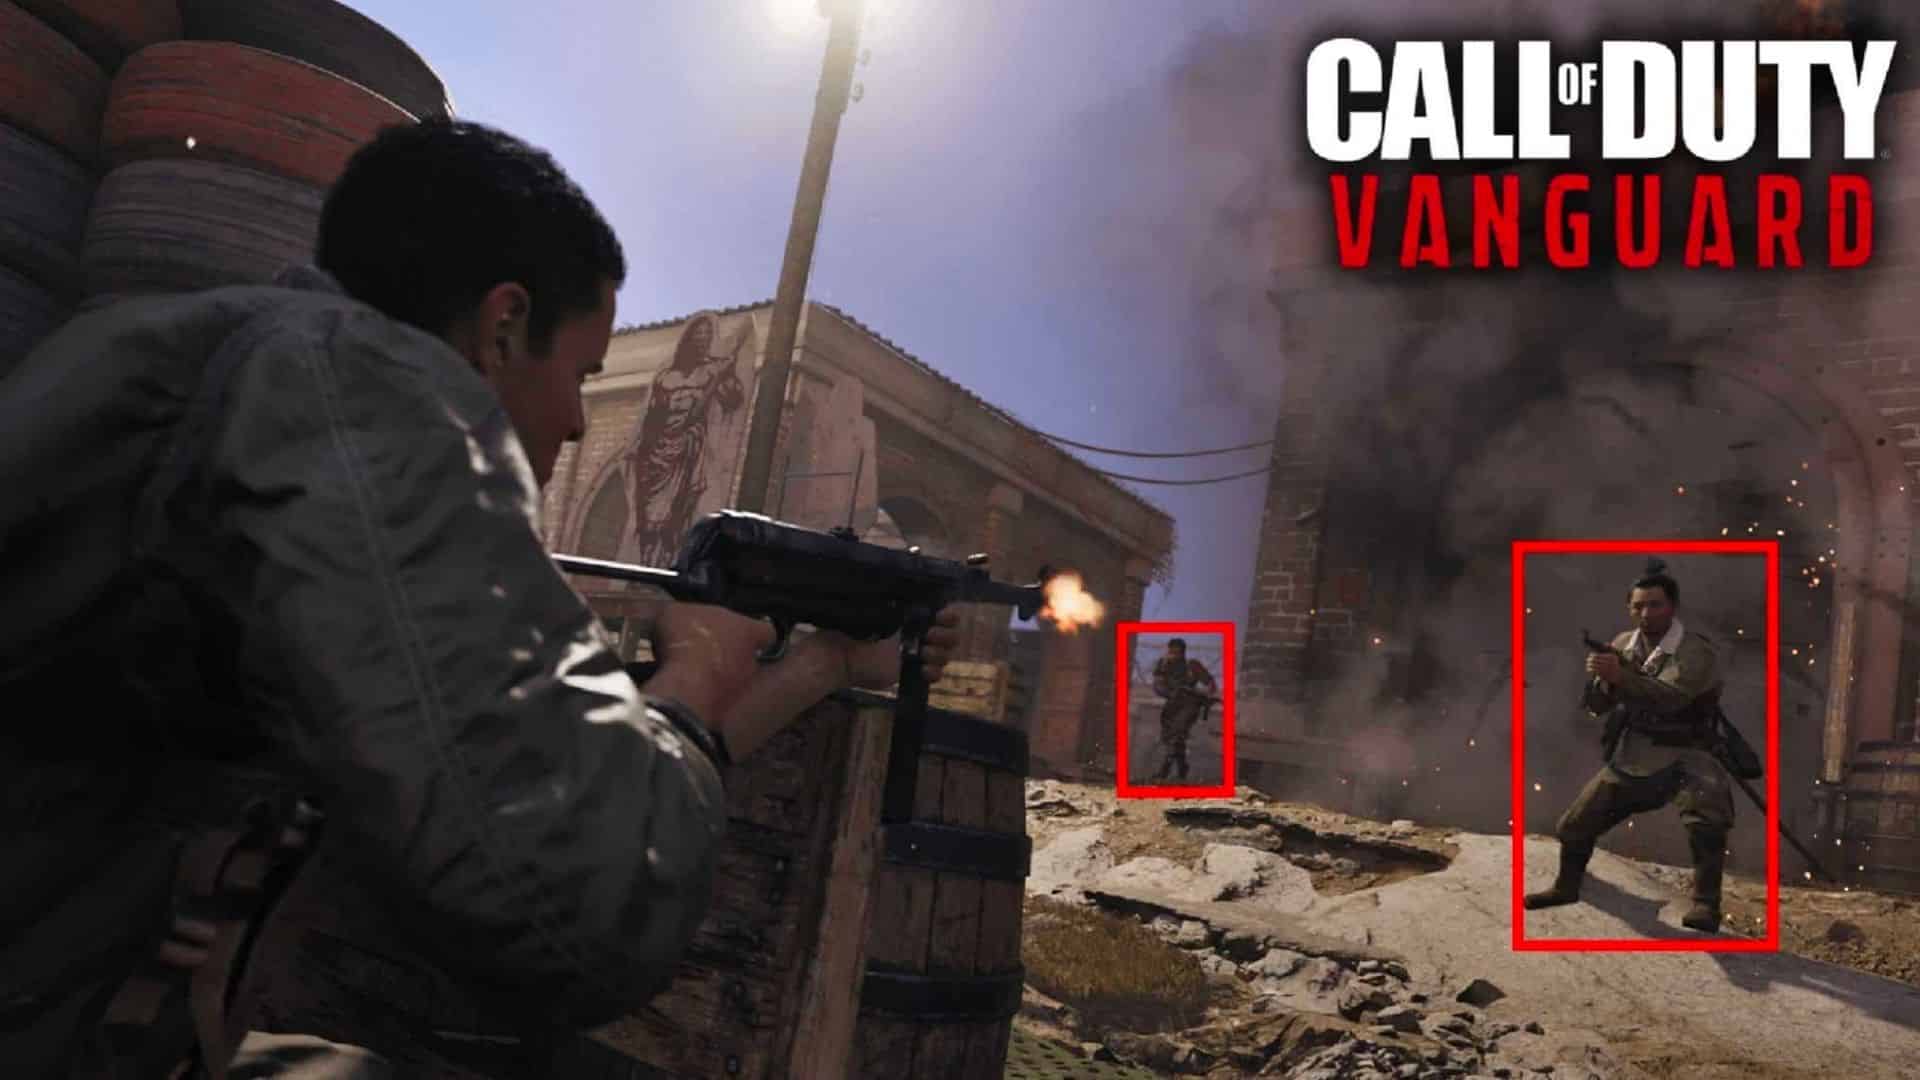 Call of Duty Vanguard players highlighted with red boxes during gunfight